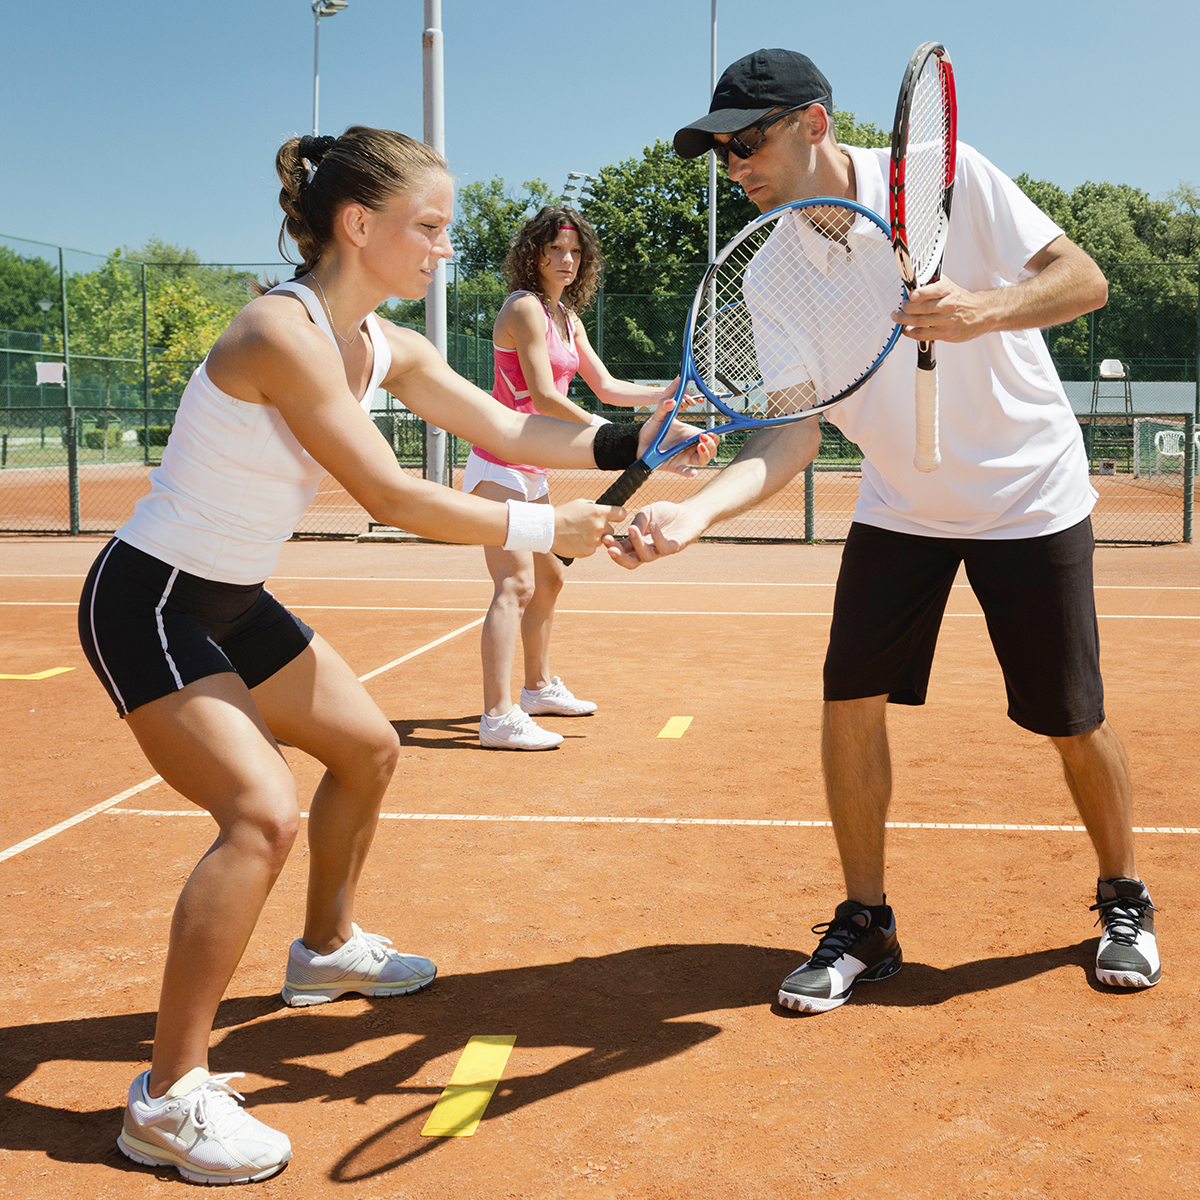 Tennis lessons are just one of the fall classes offered by Campus Rec.